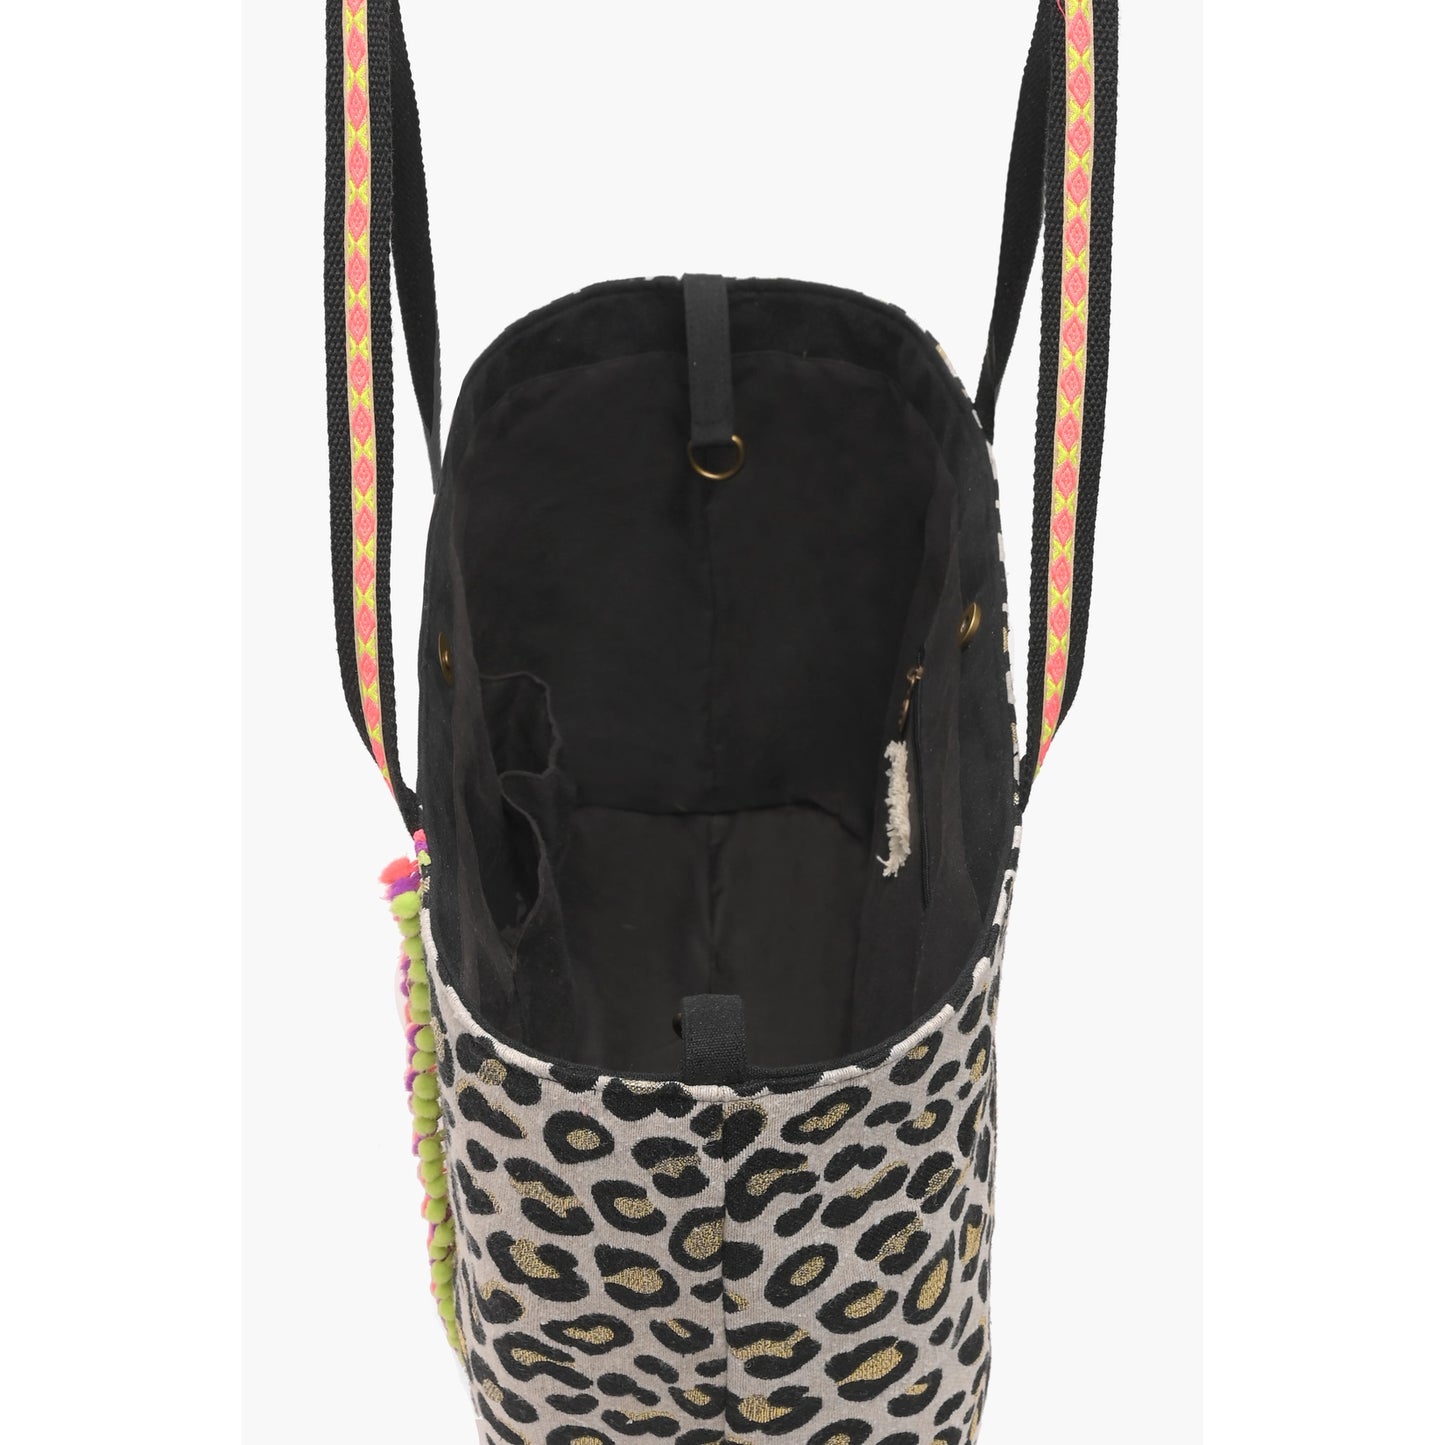 Cheetah Queen Embellished Tote